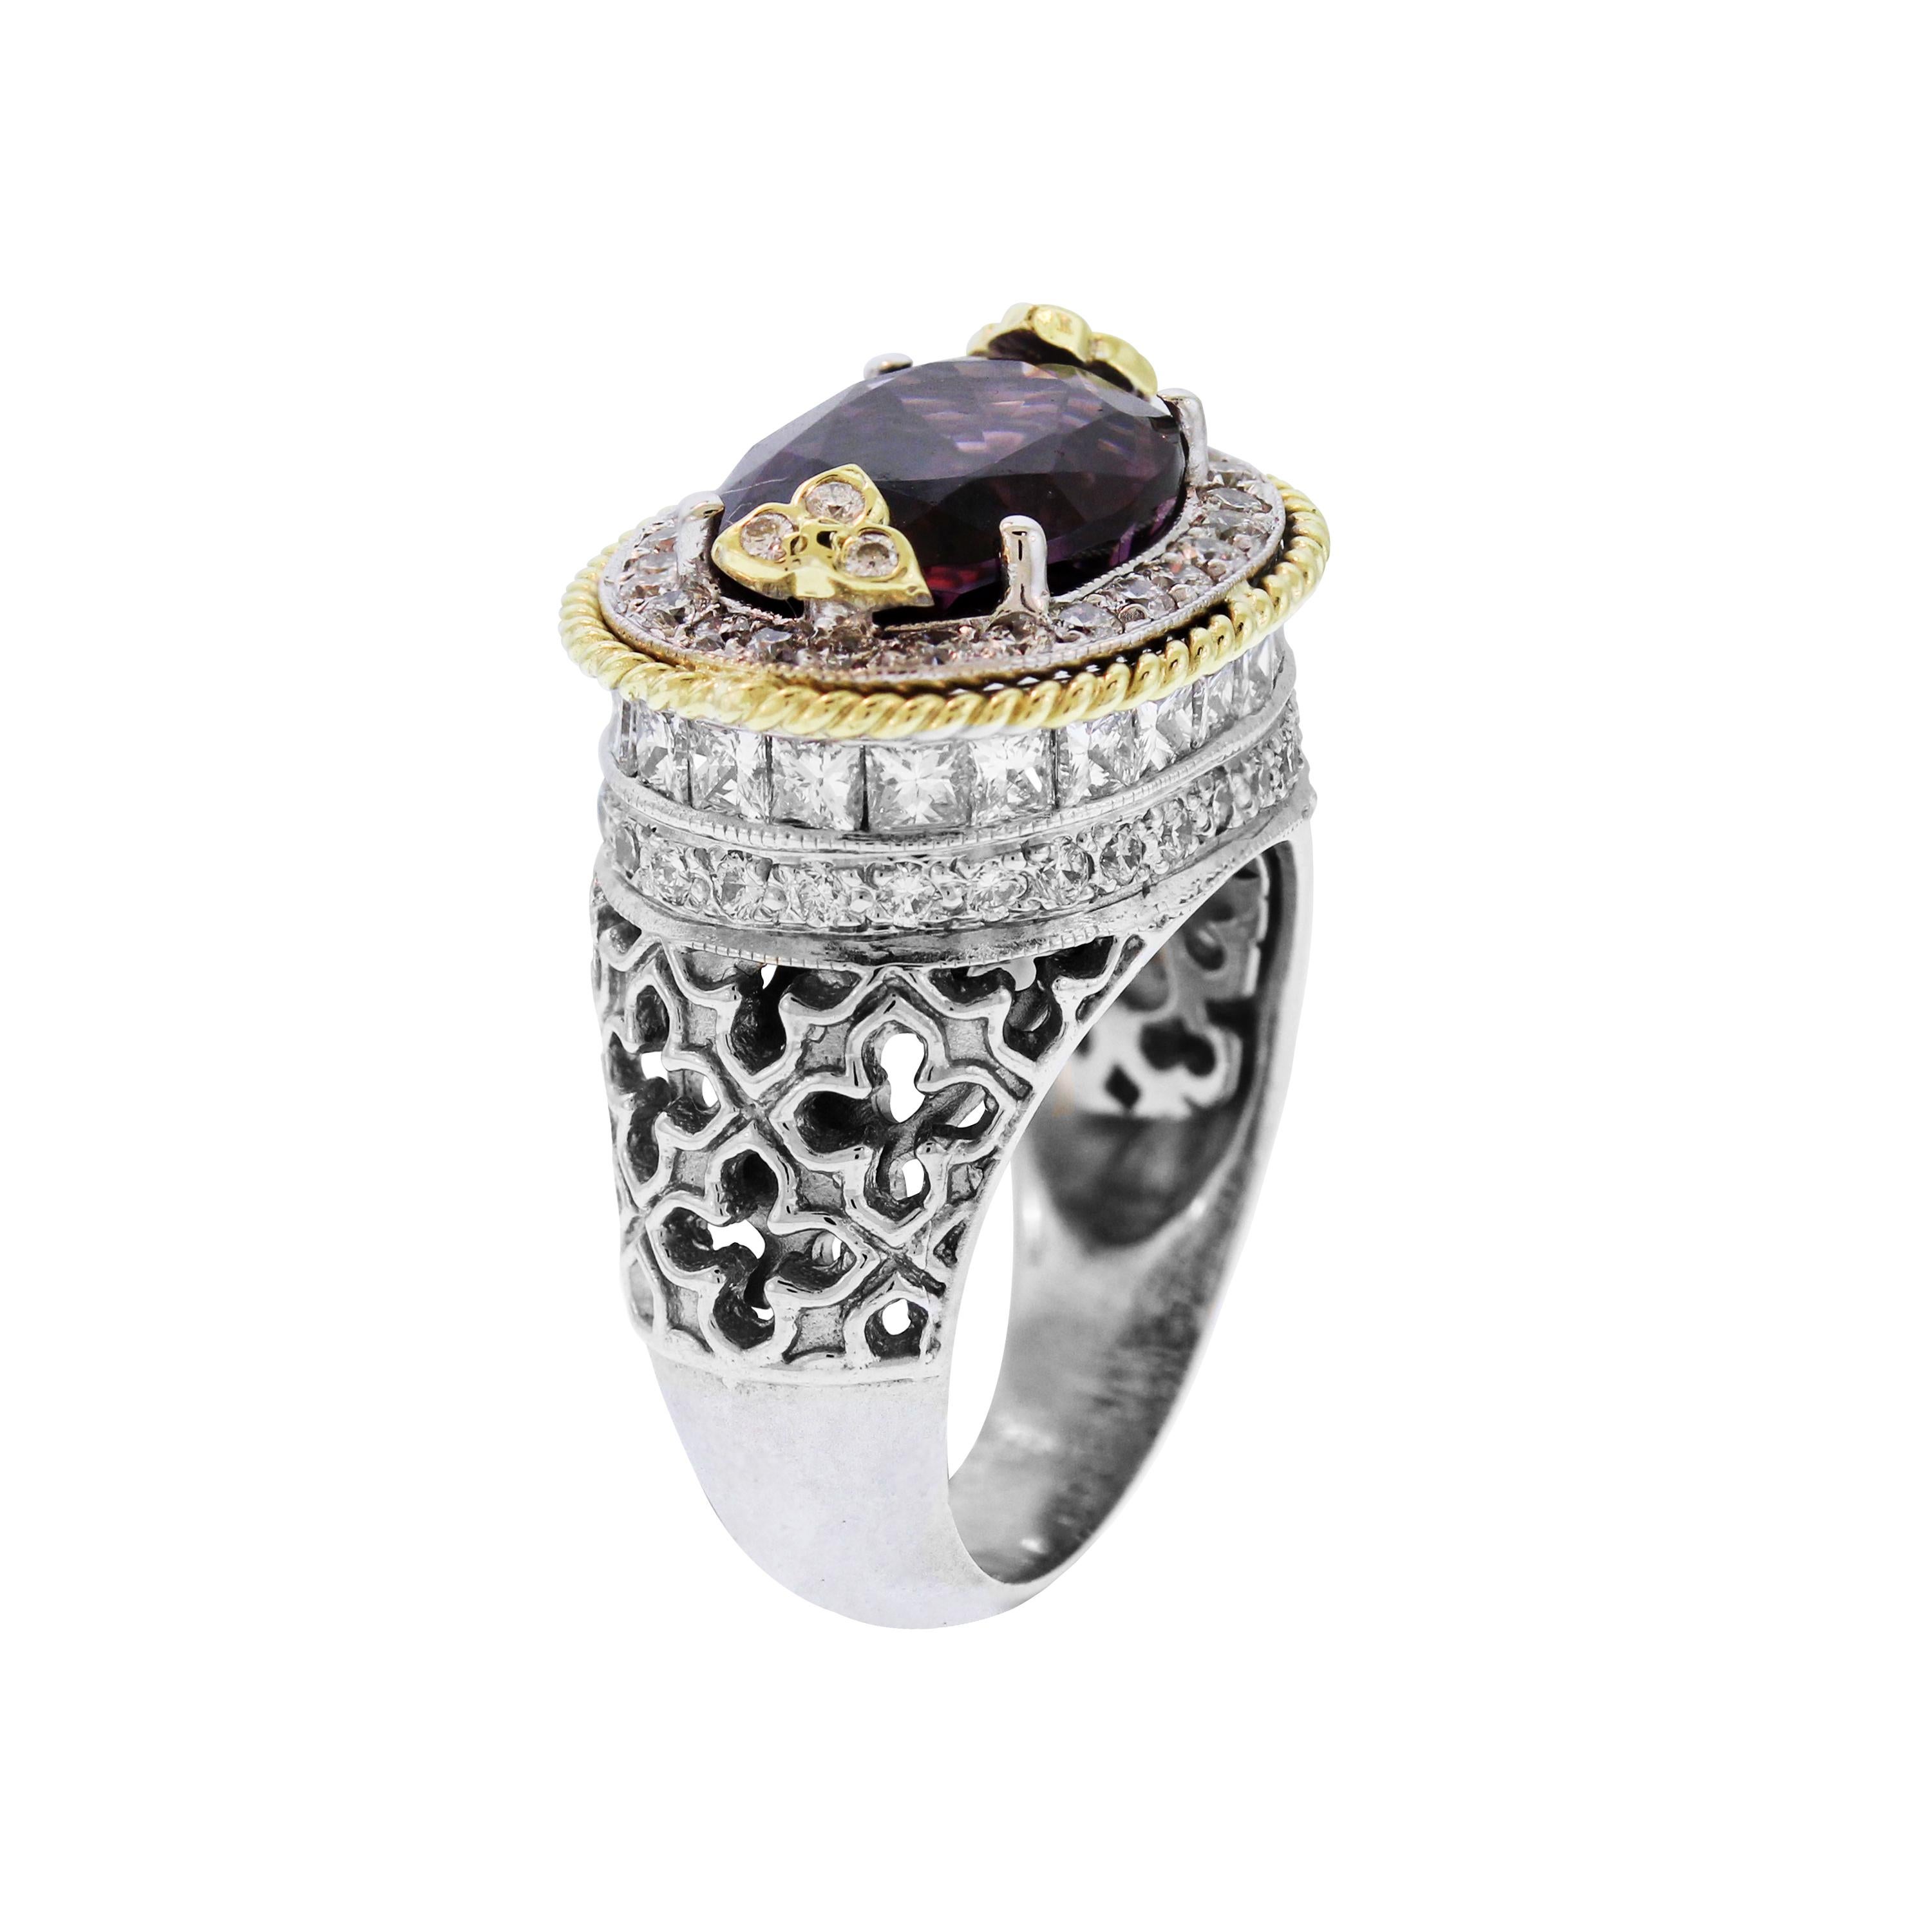 IF YOU ARE REALLY INTERESTED, CONTACT US WITH ANY REASONABLE OFFER. WE WILL TRY OUR BEST TO MAKE YOU HAPPY!

18K Yellow and White Gold Ring with Princess and Round cut diamonds and Purple Spinel center

Oval, 6.91 carat Purple Spinel